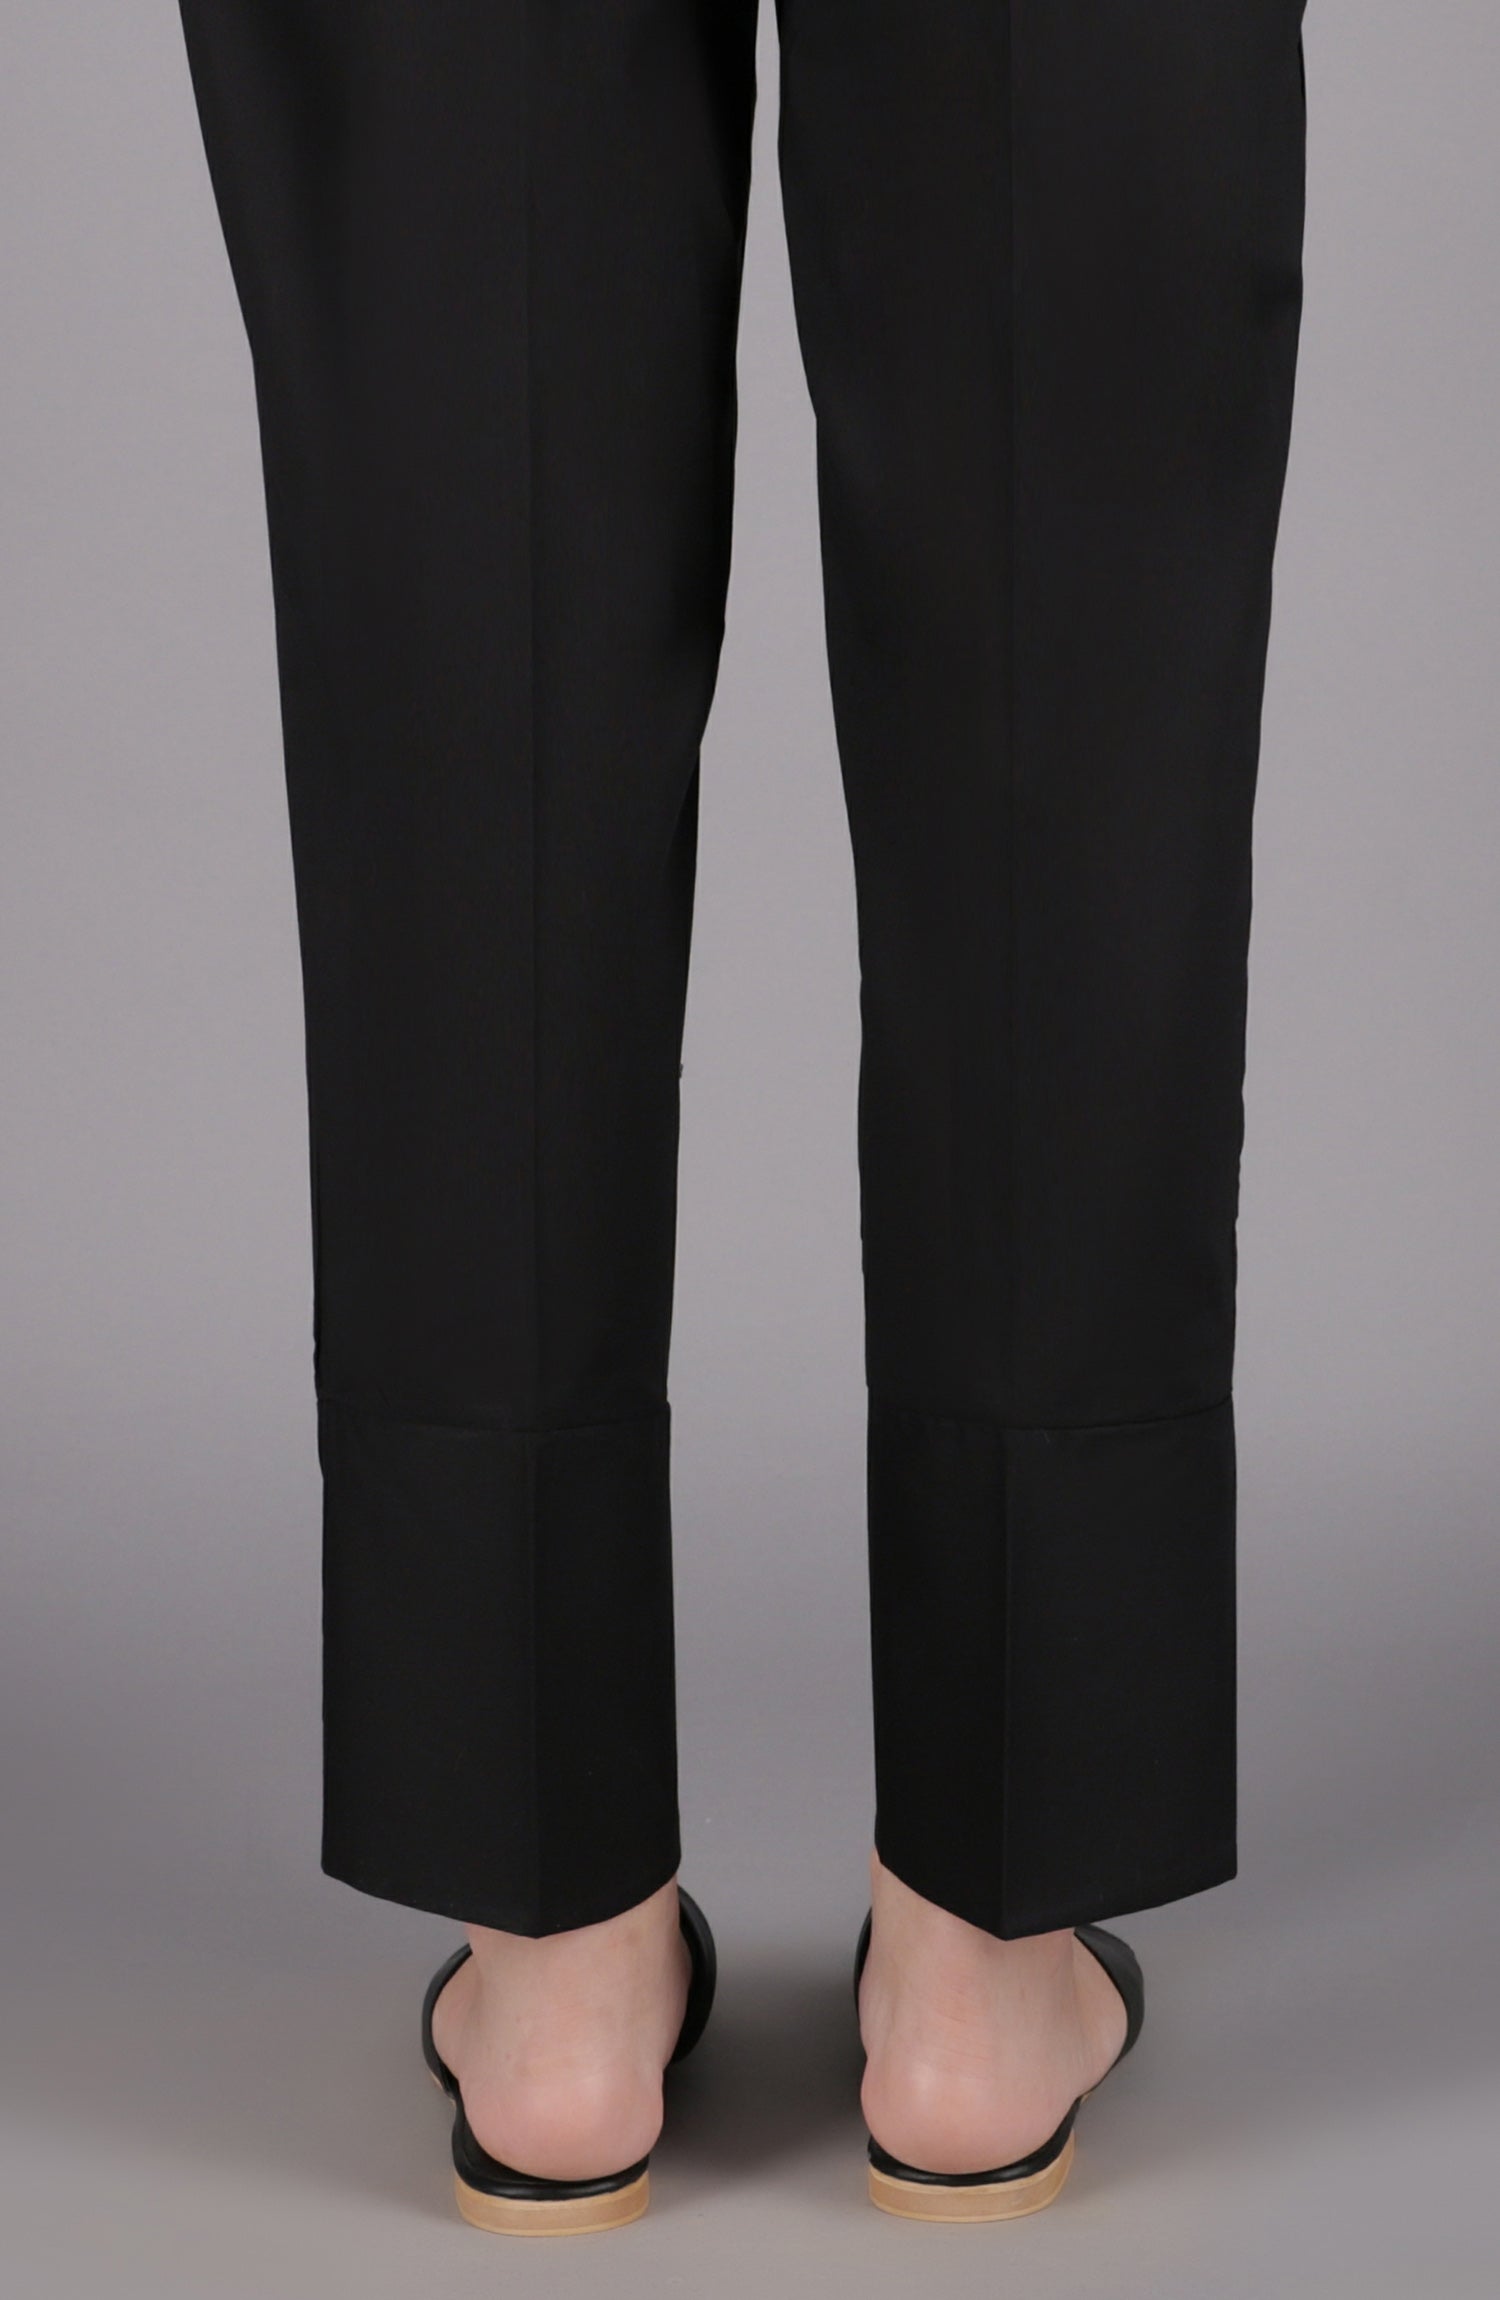 NRP-105/S BLACK CAMBRIC SCPANTS STITCHED BOTTOMS PANTS